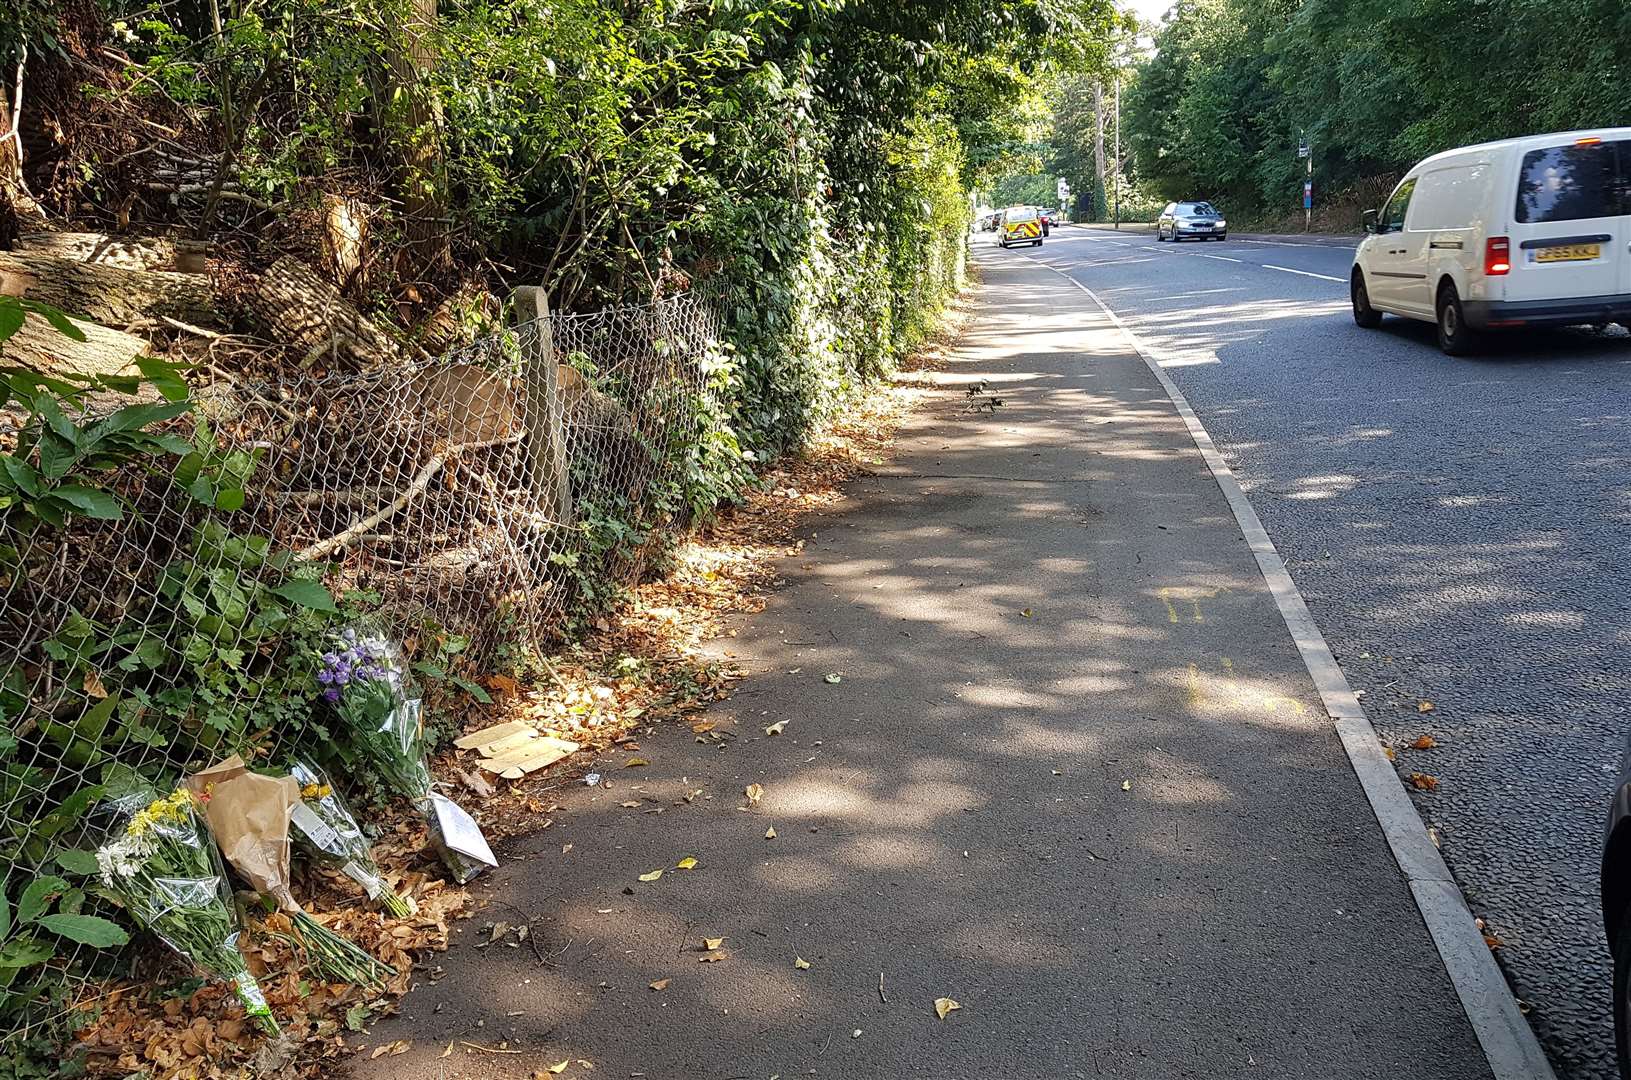 Floral tributes were left at the spot where he died